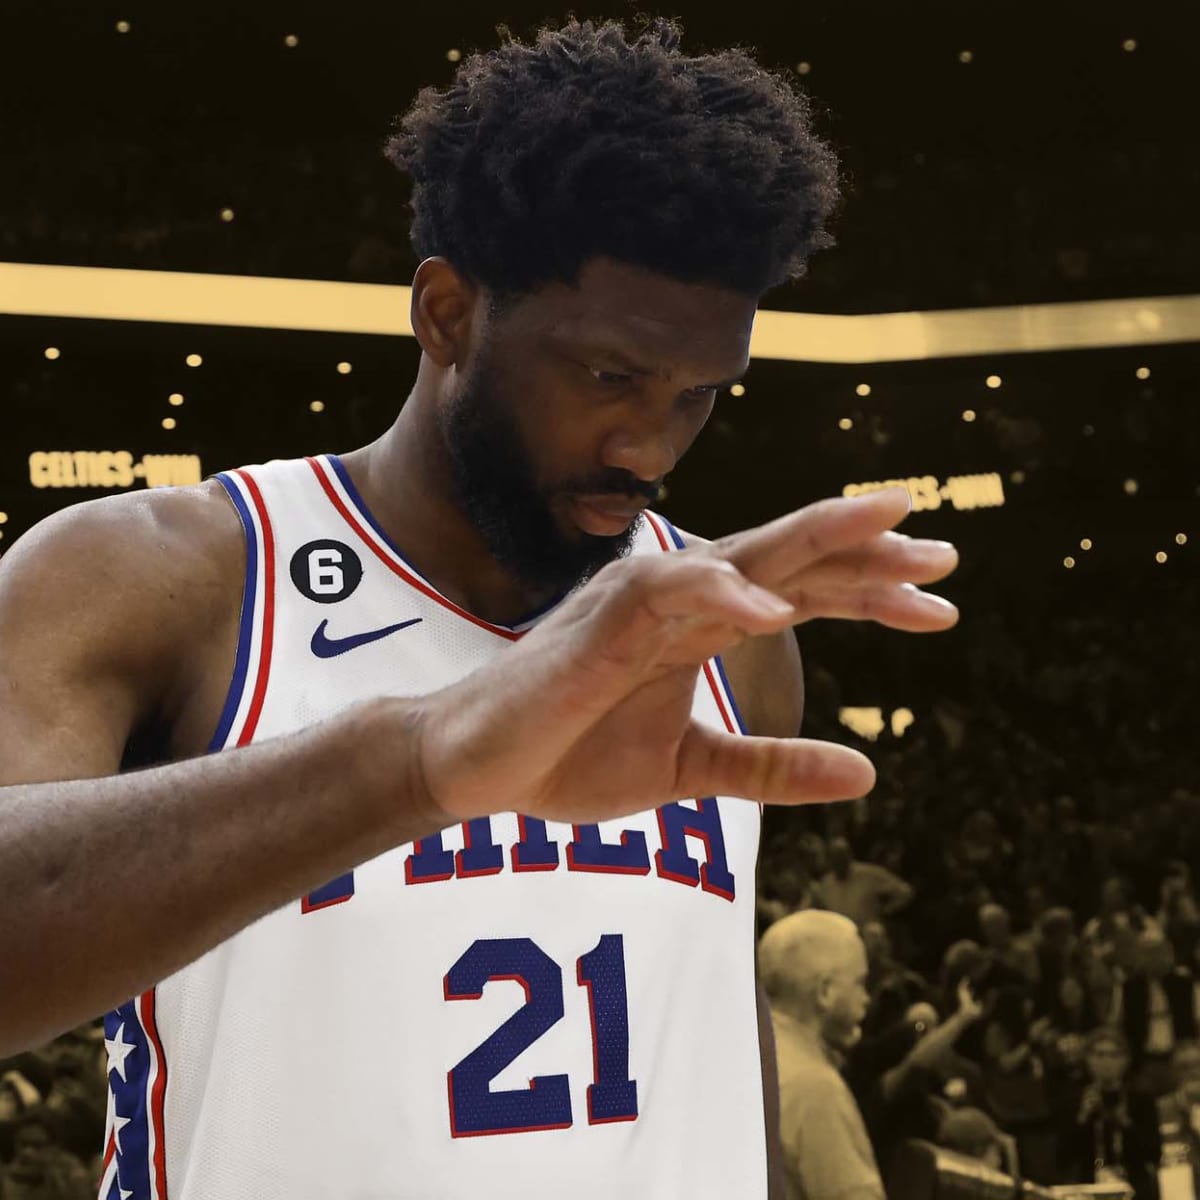 Joel Embiid is Sixers' lone All-Star, James Harden left off roster